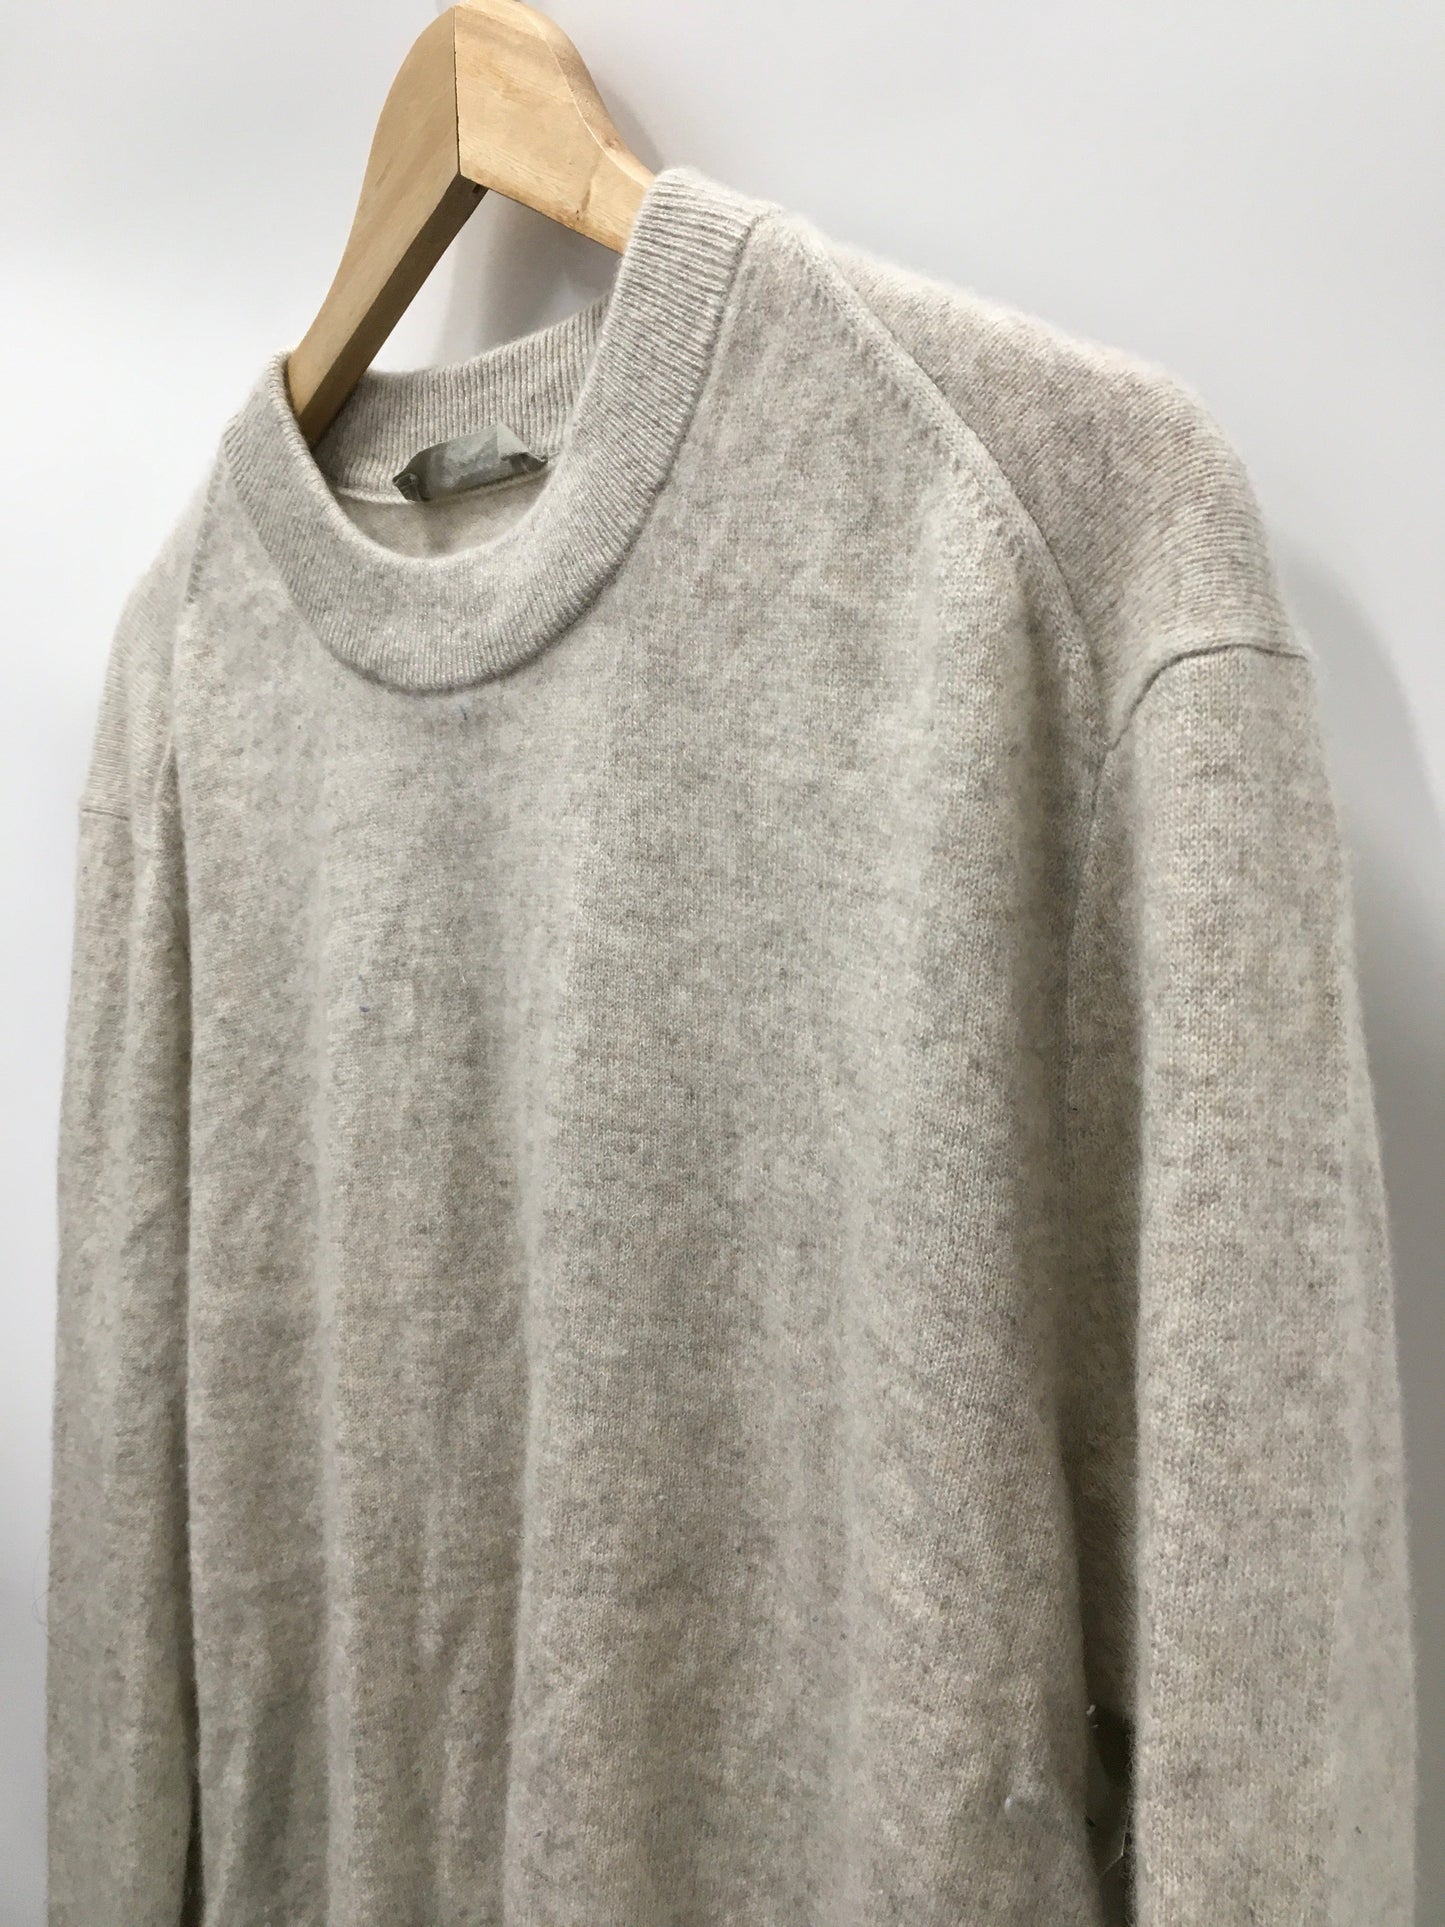 Sweater Cashmere By Everlane  Size: Xl